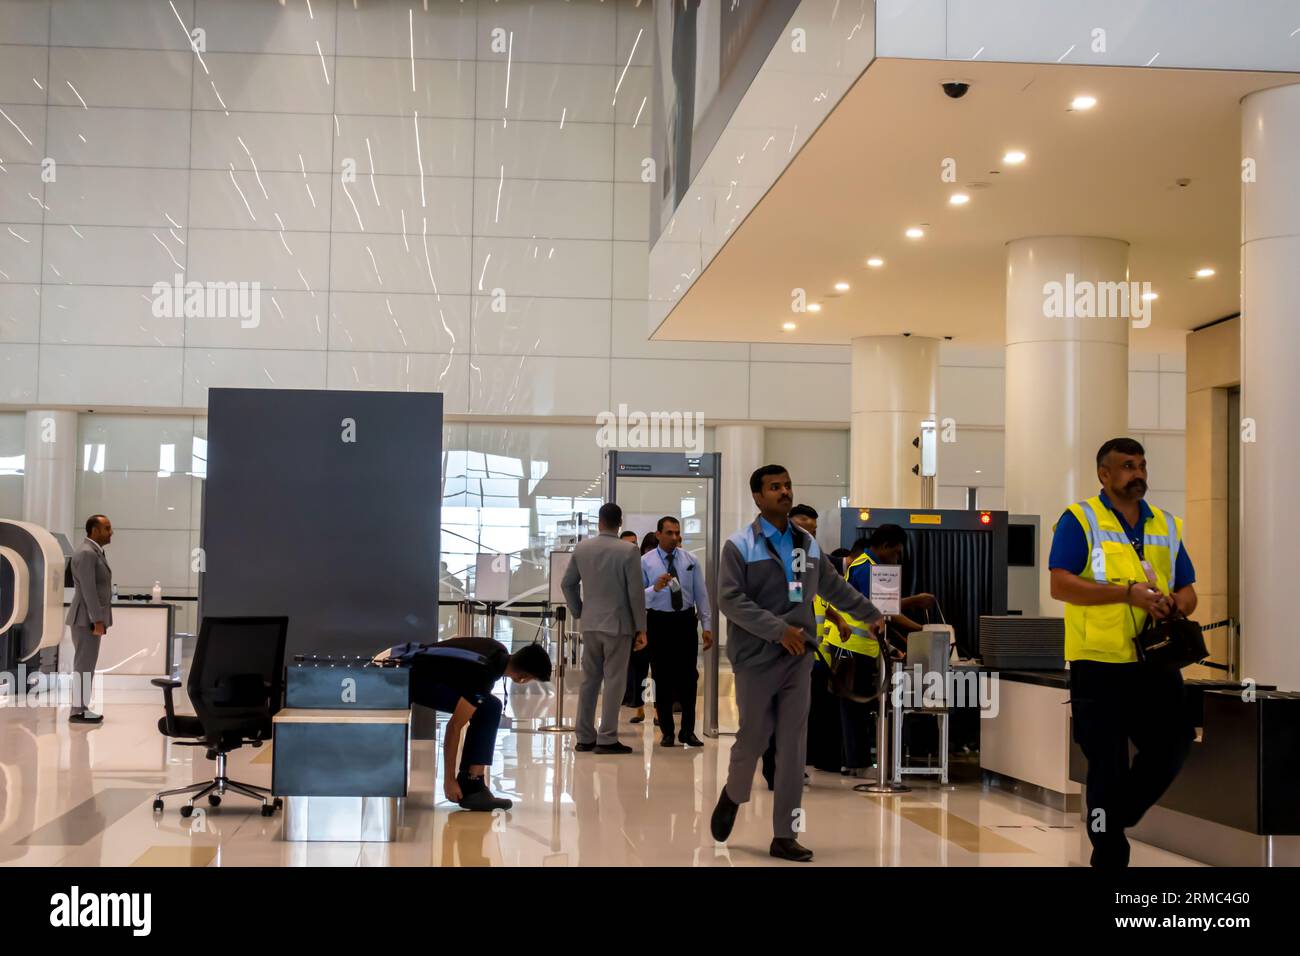 Security check in airport. Security screening of carry-on luggage prior to the gates entrance, Dubai airport Middle East Luggage checking in airport. Stock Photo